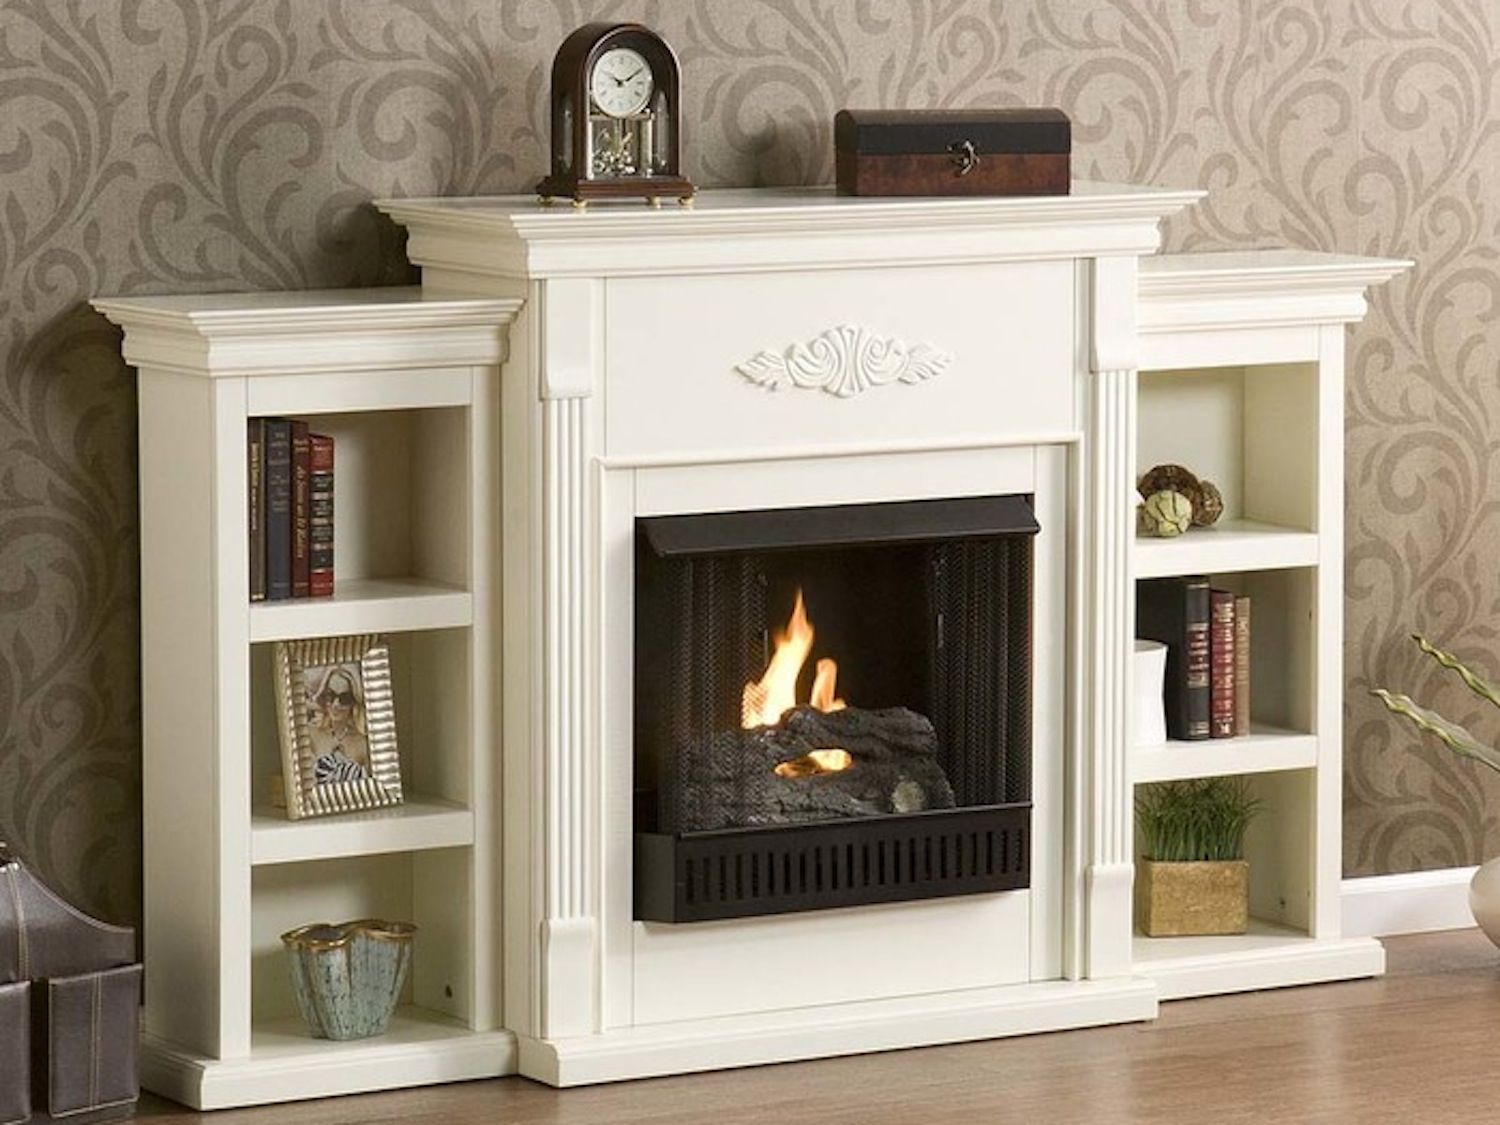 Gas Fireplace with Electric Switch Beautiful How to Use Gel Fuel Fireplaces Indoors or Outdoors